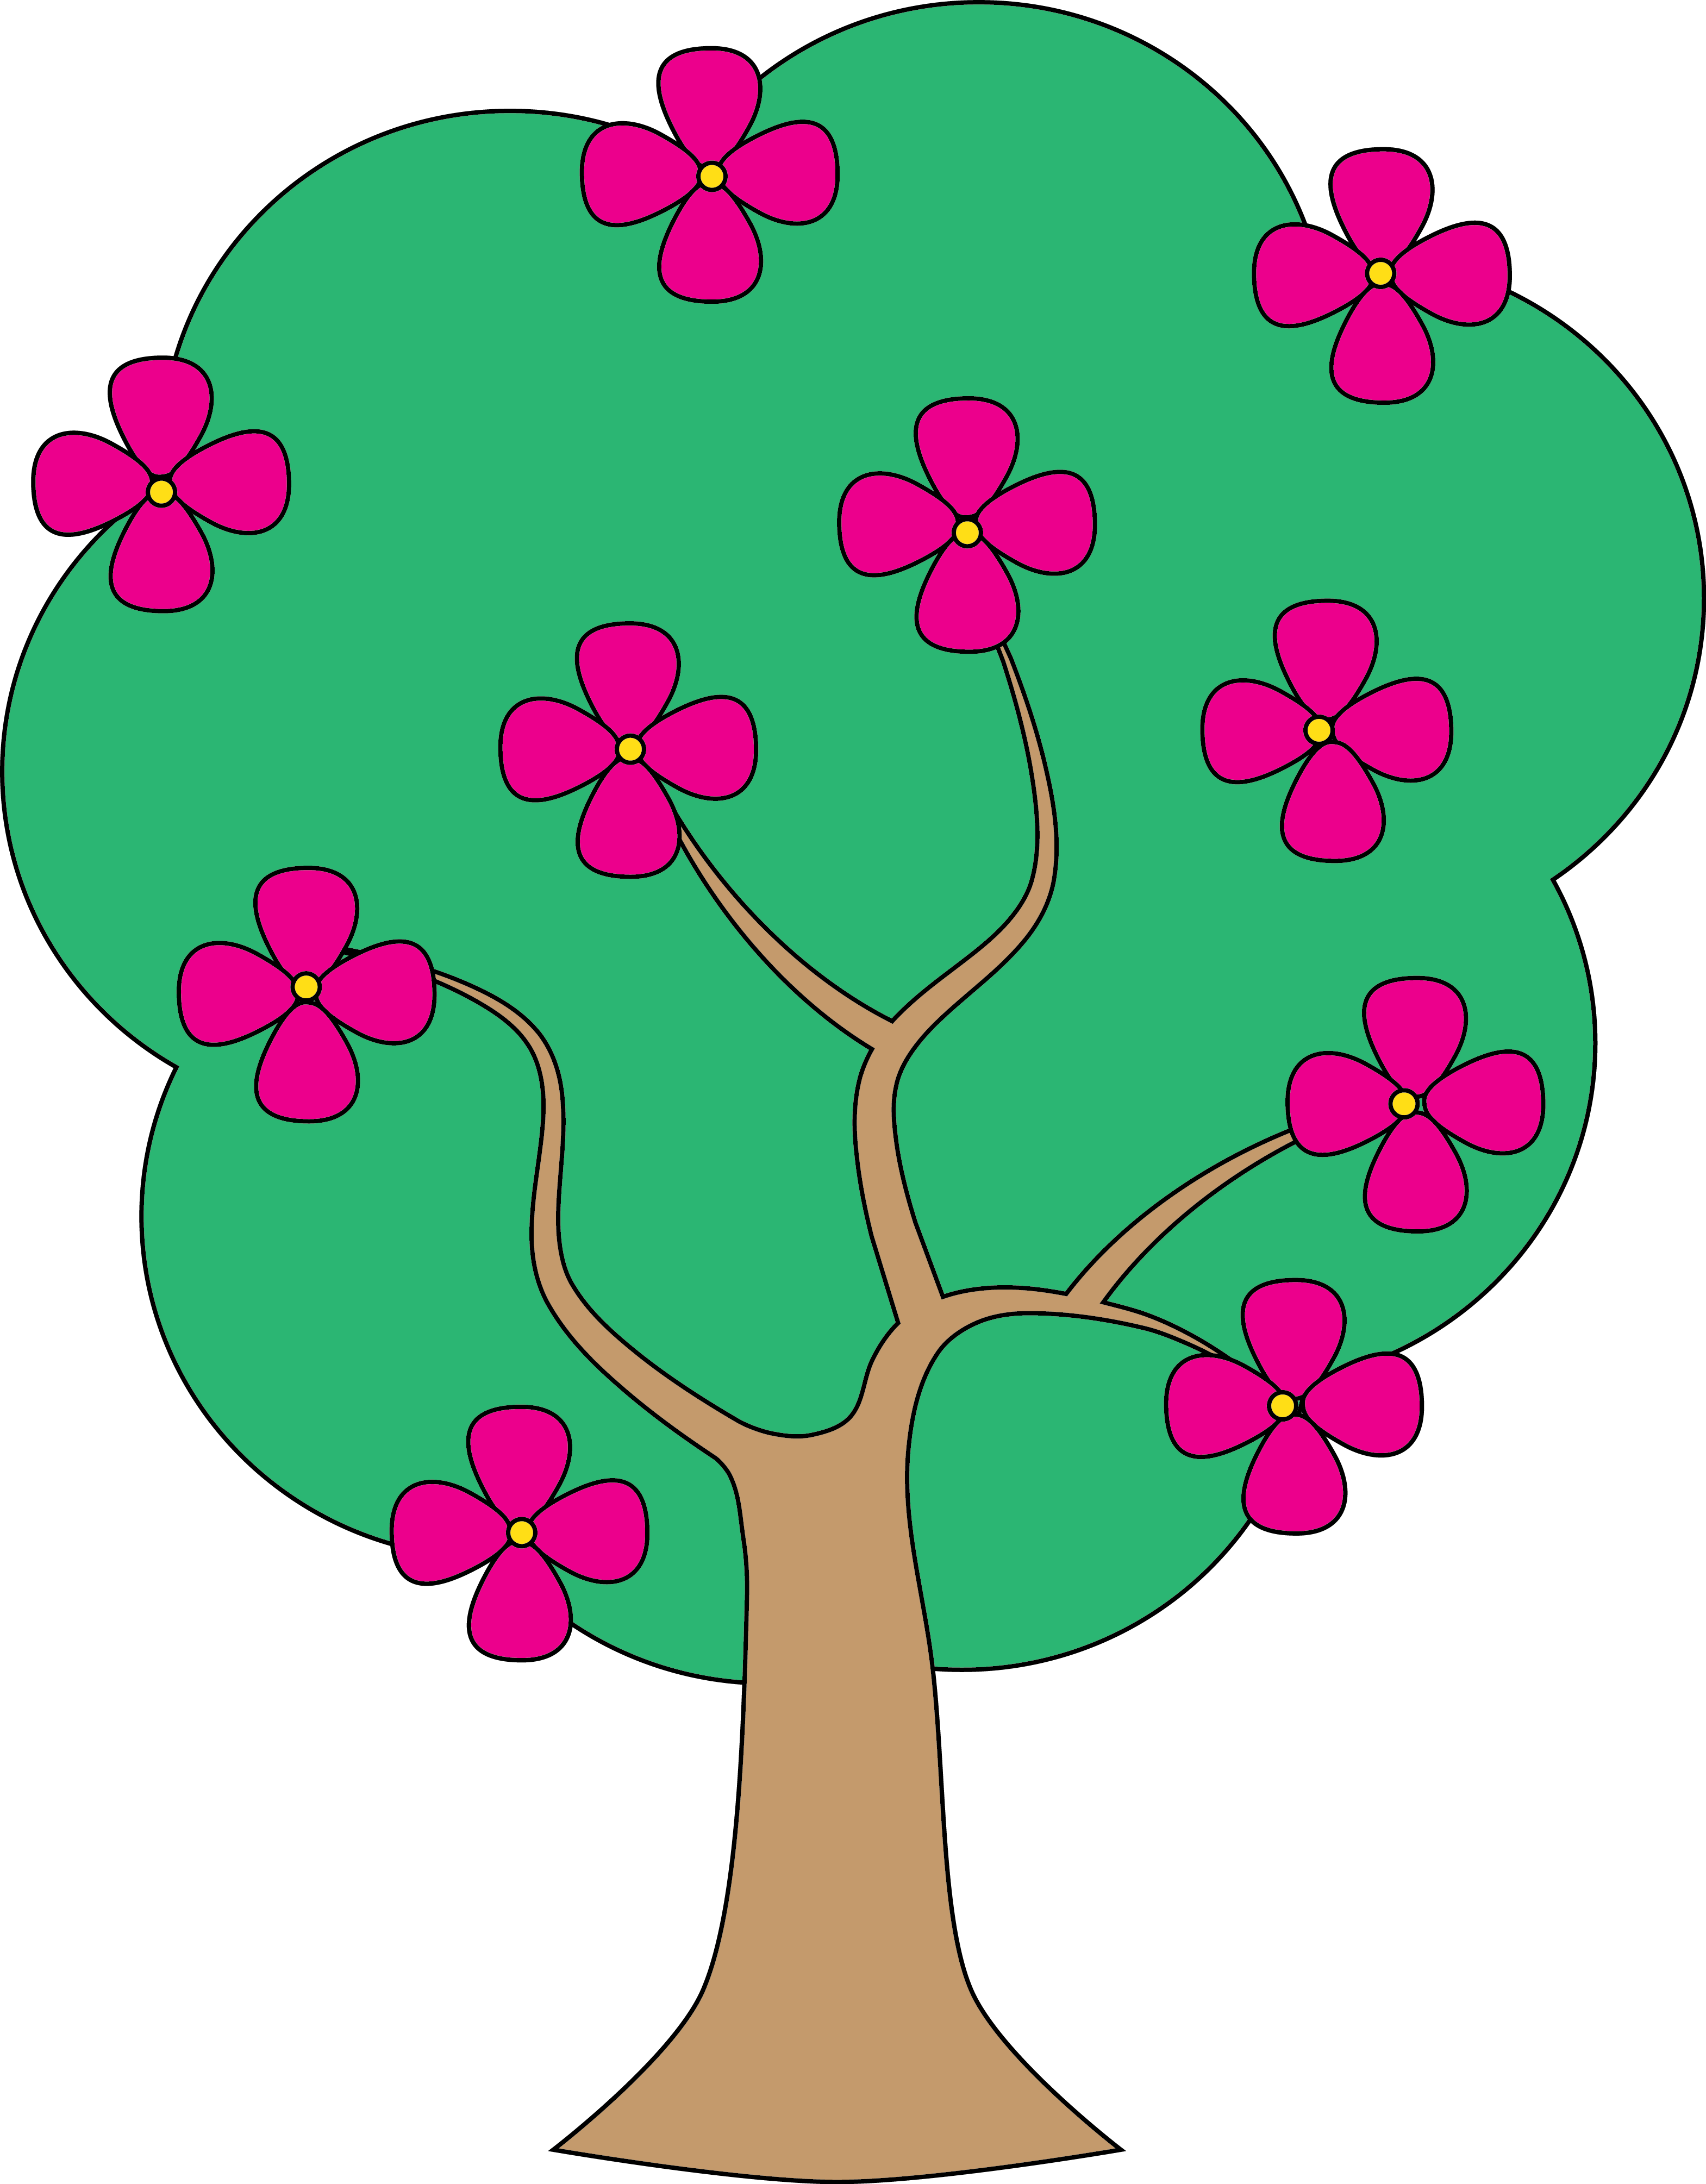 Bloosoming apple tree clipart